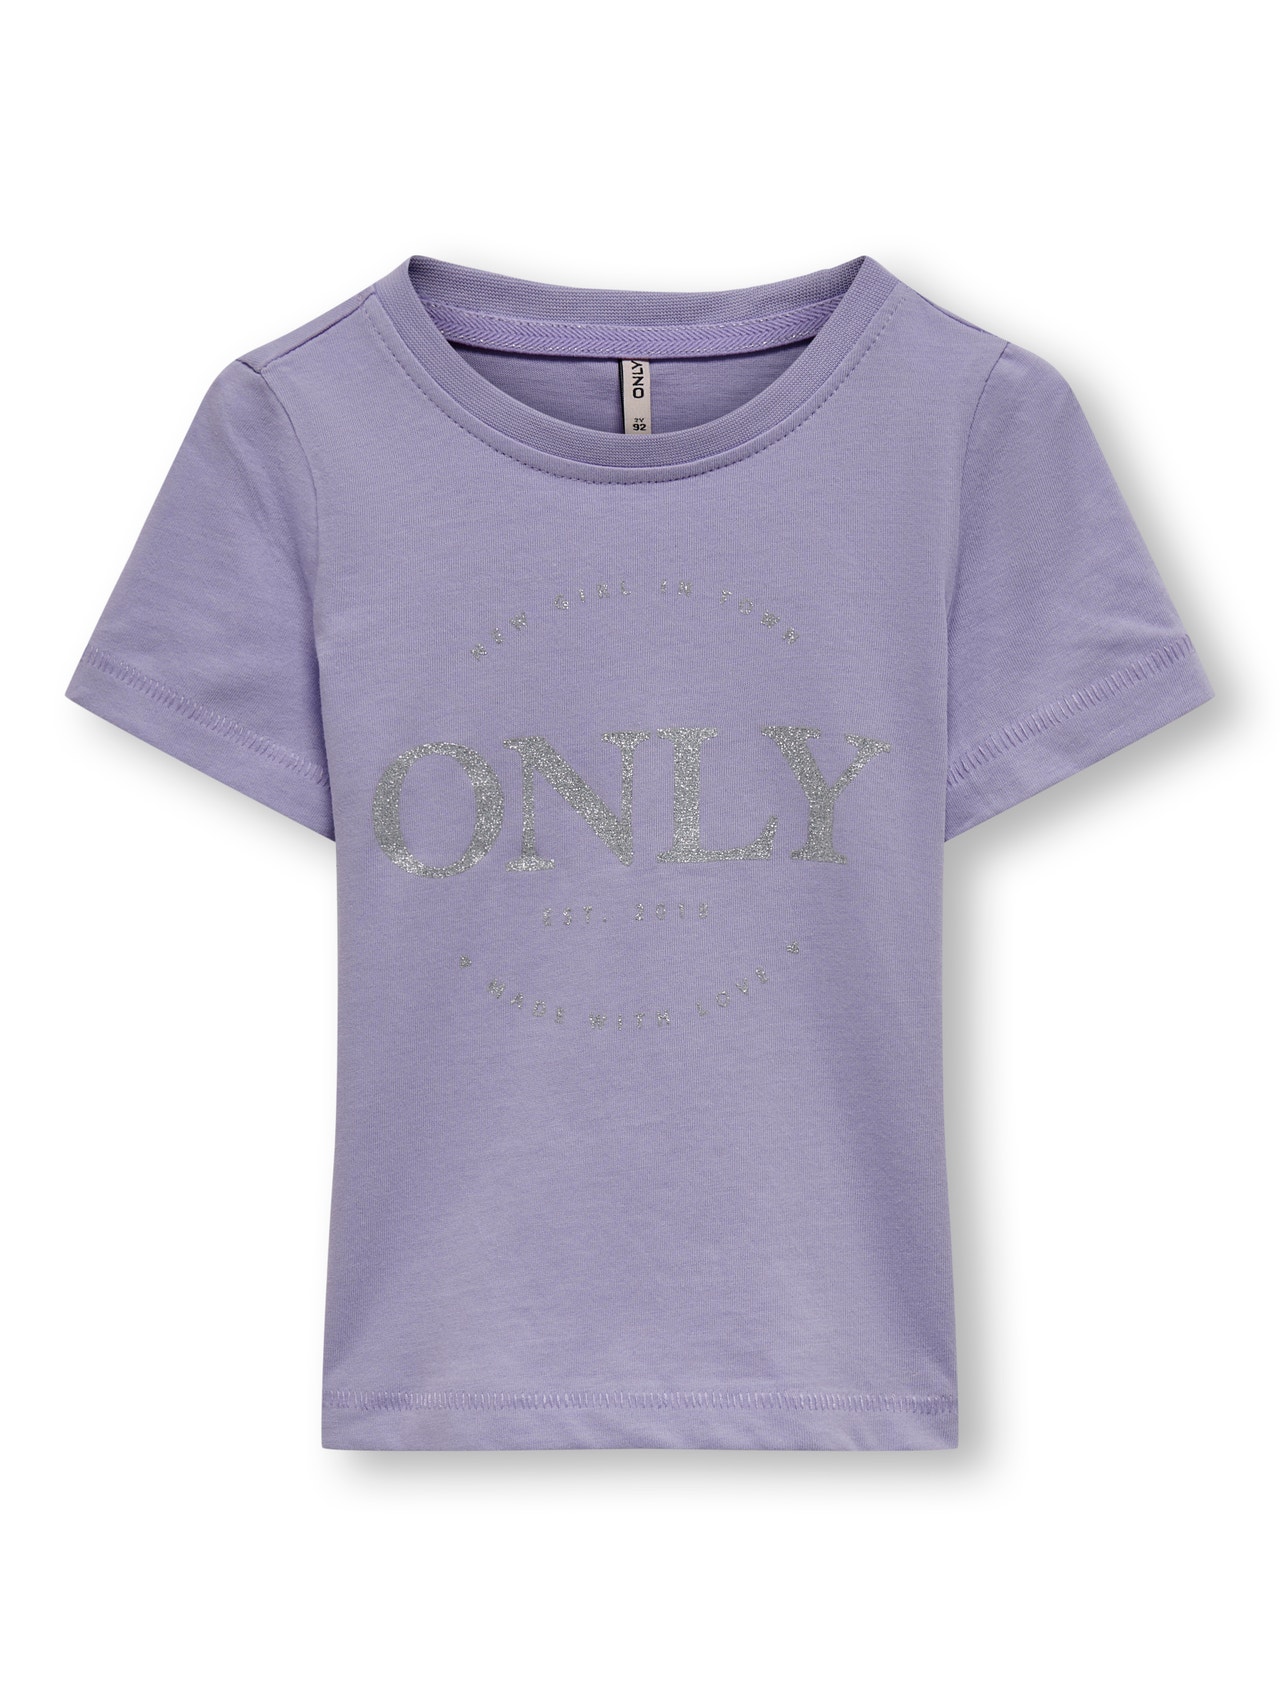 ONLY Mini ONLY-logo T-shirt -Purple Rose - 15250807